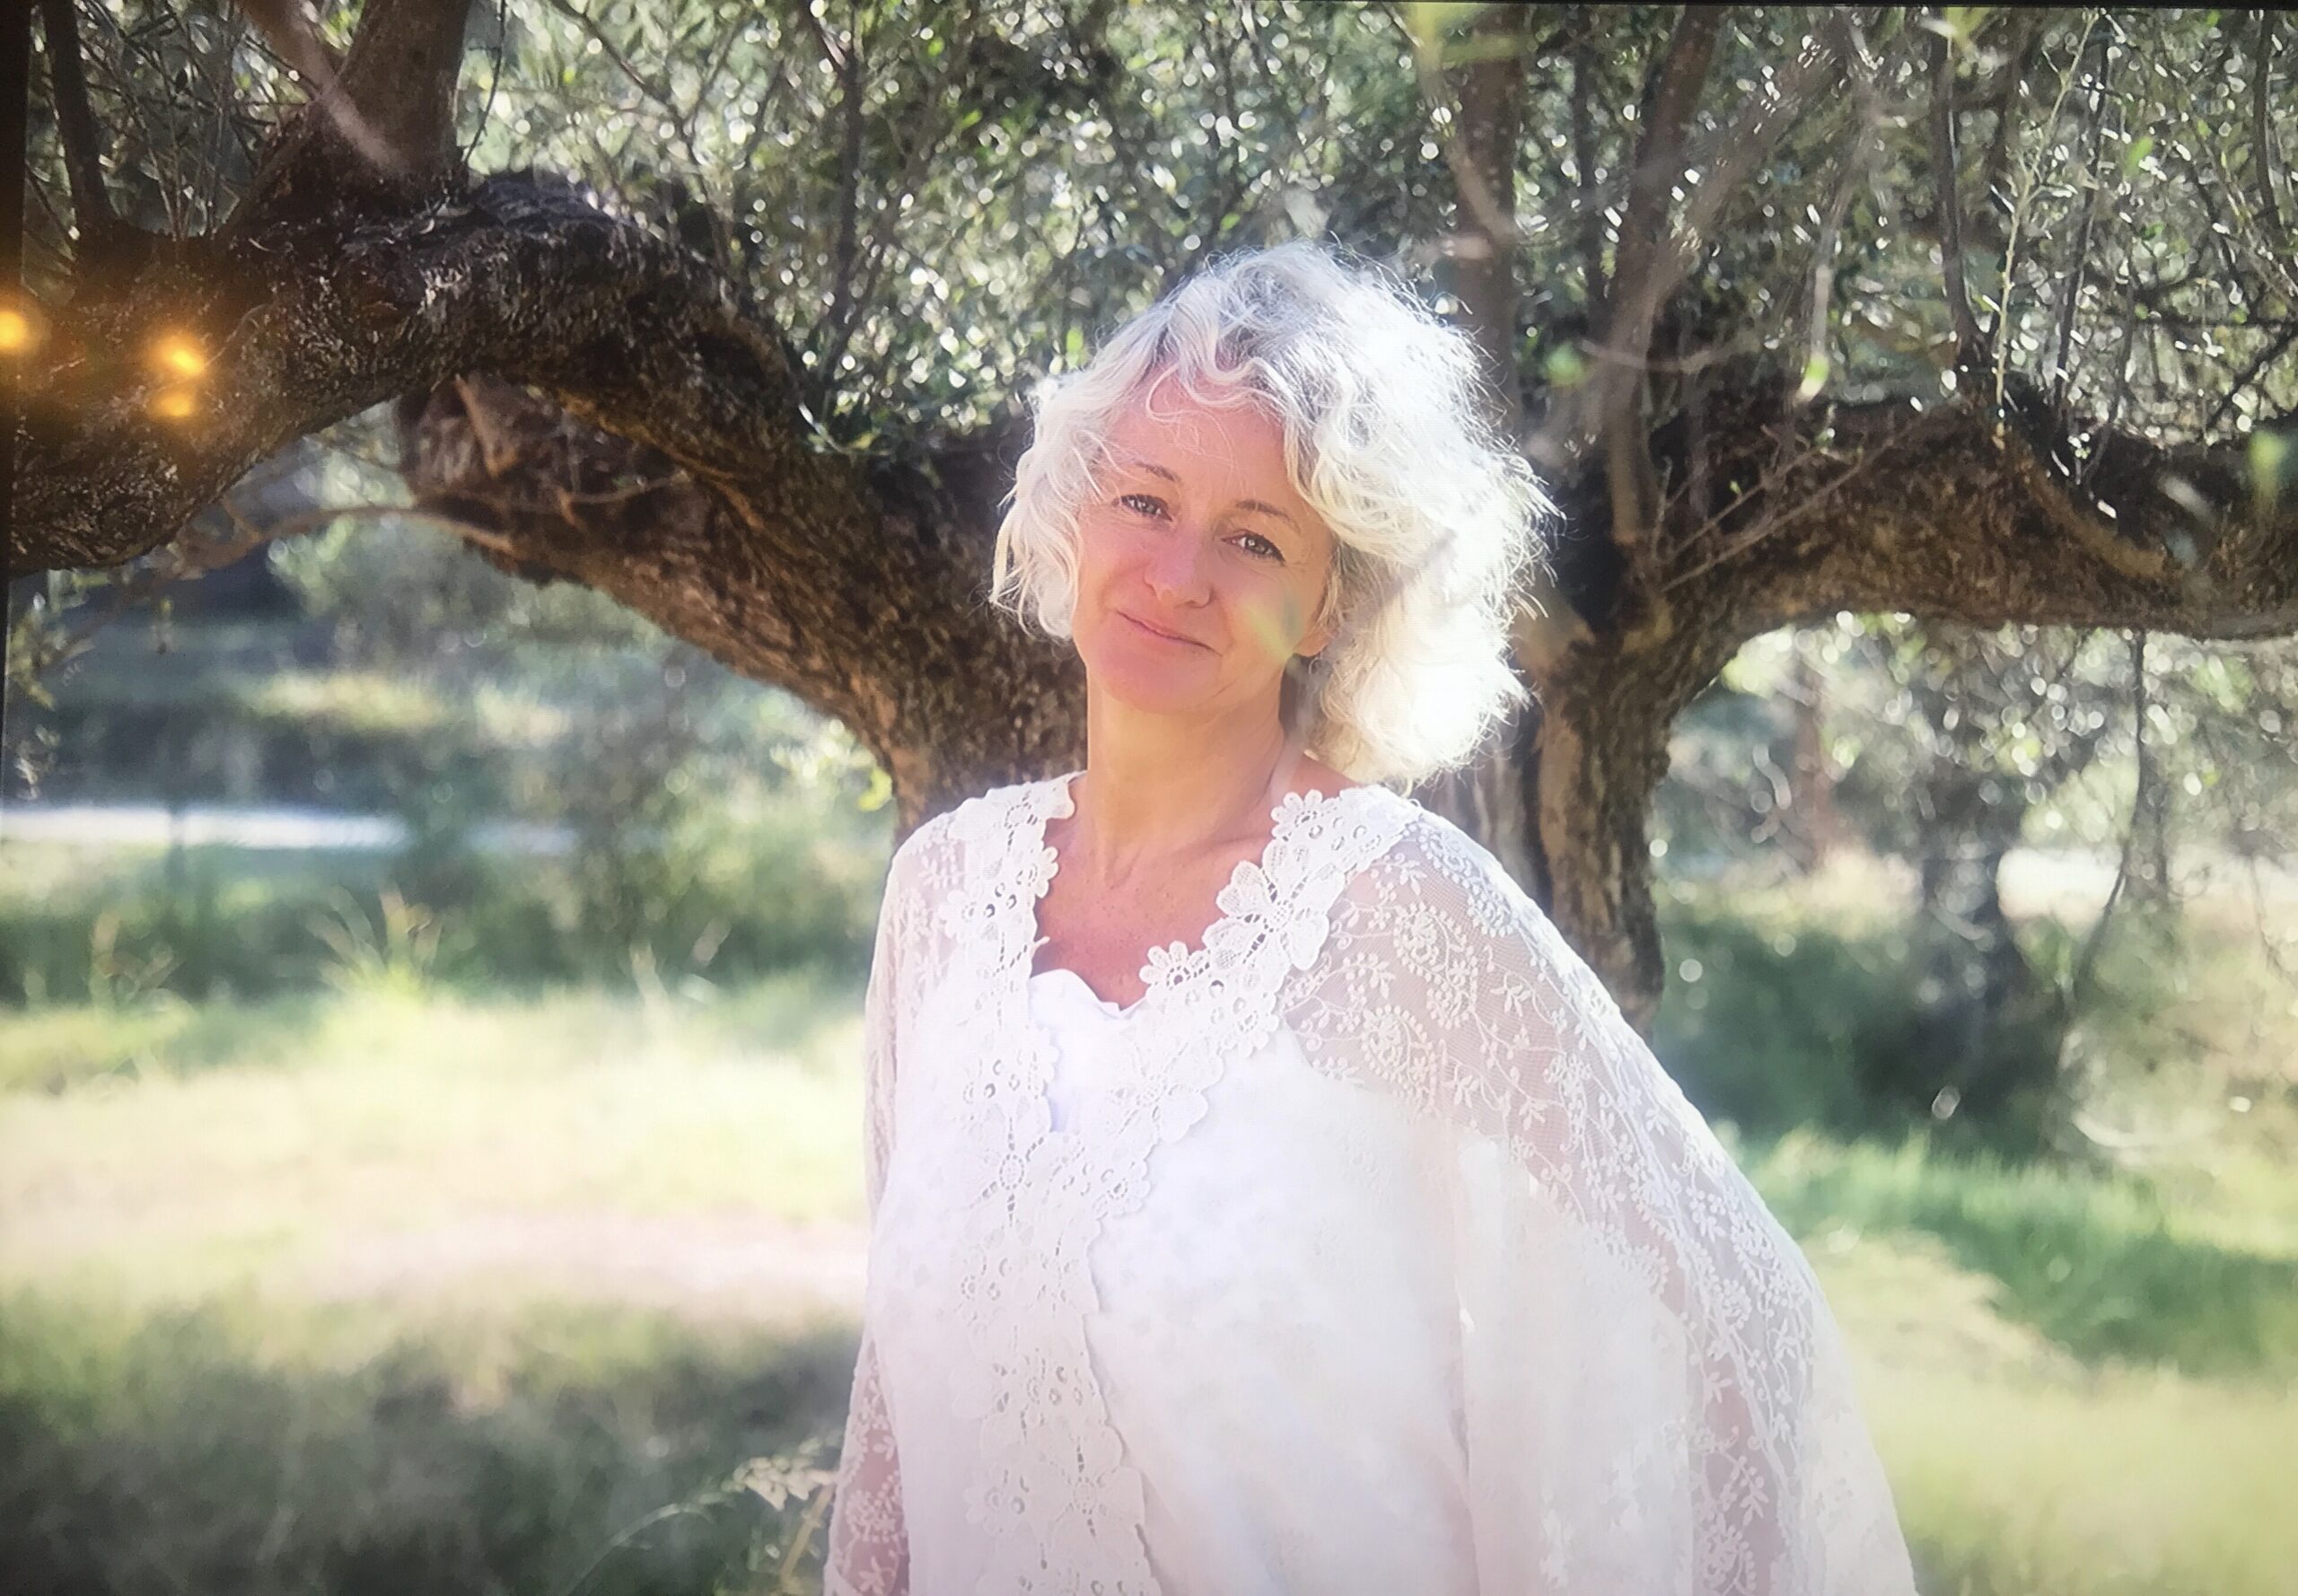 Picture of Patrizia Bortolin in a white flowing top on a sunny day with a large tree in the background